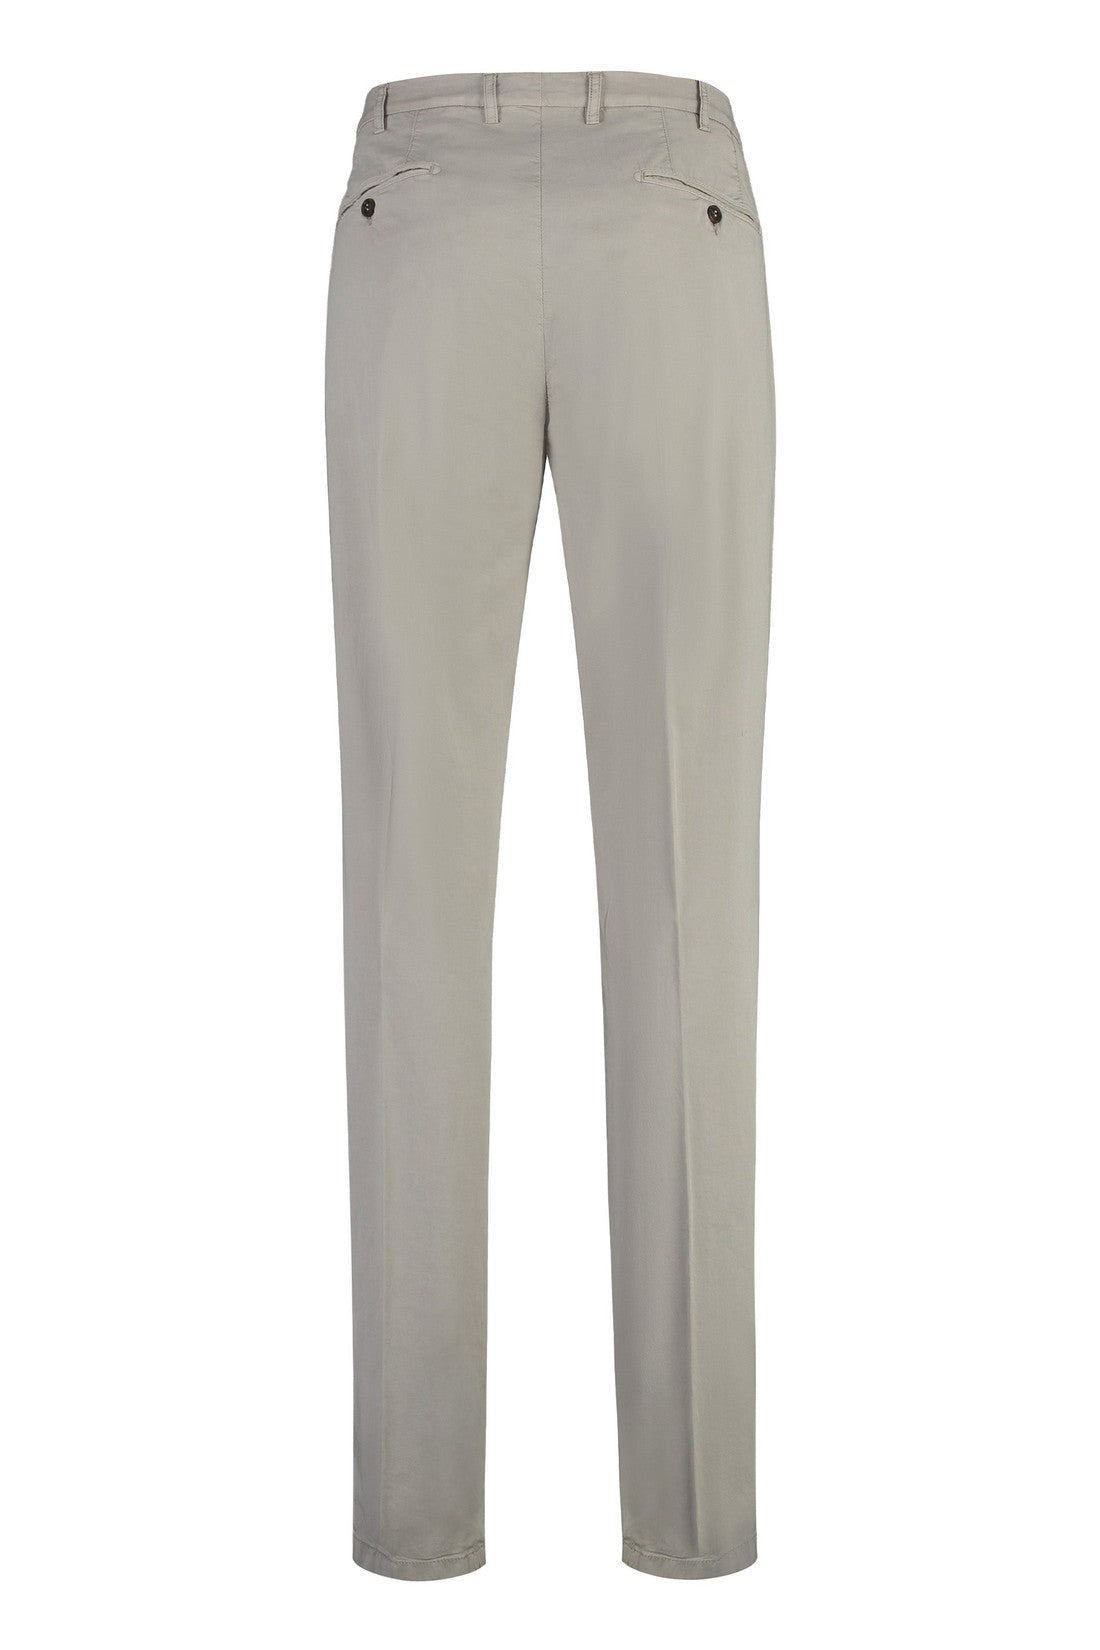 Canali-OUTLET-SALE-Slim fit chino trousers-ARCHIVIST